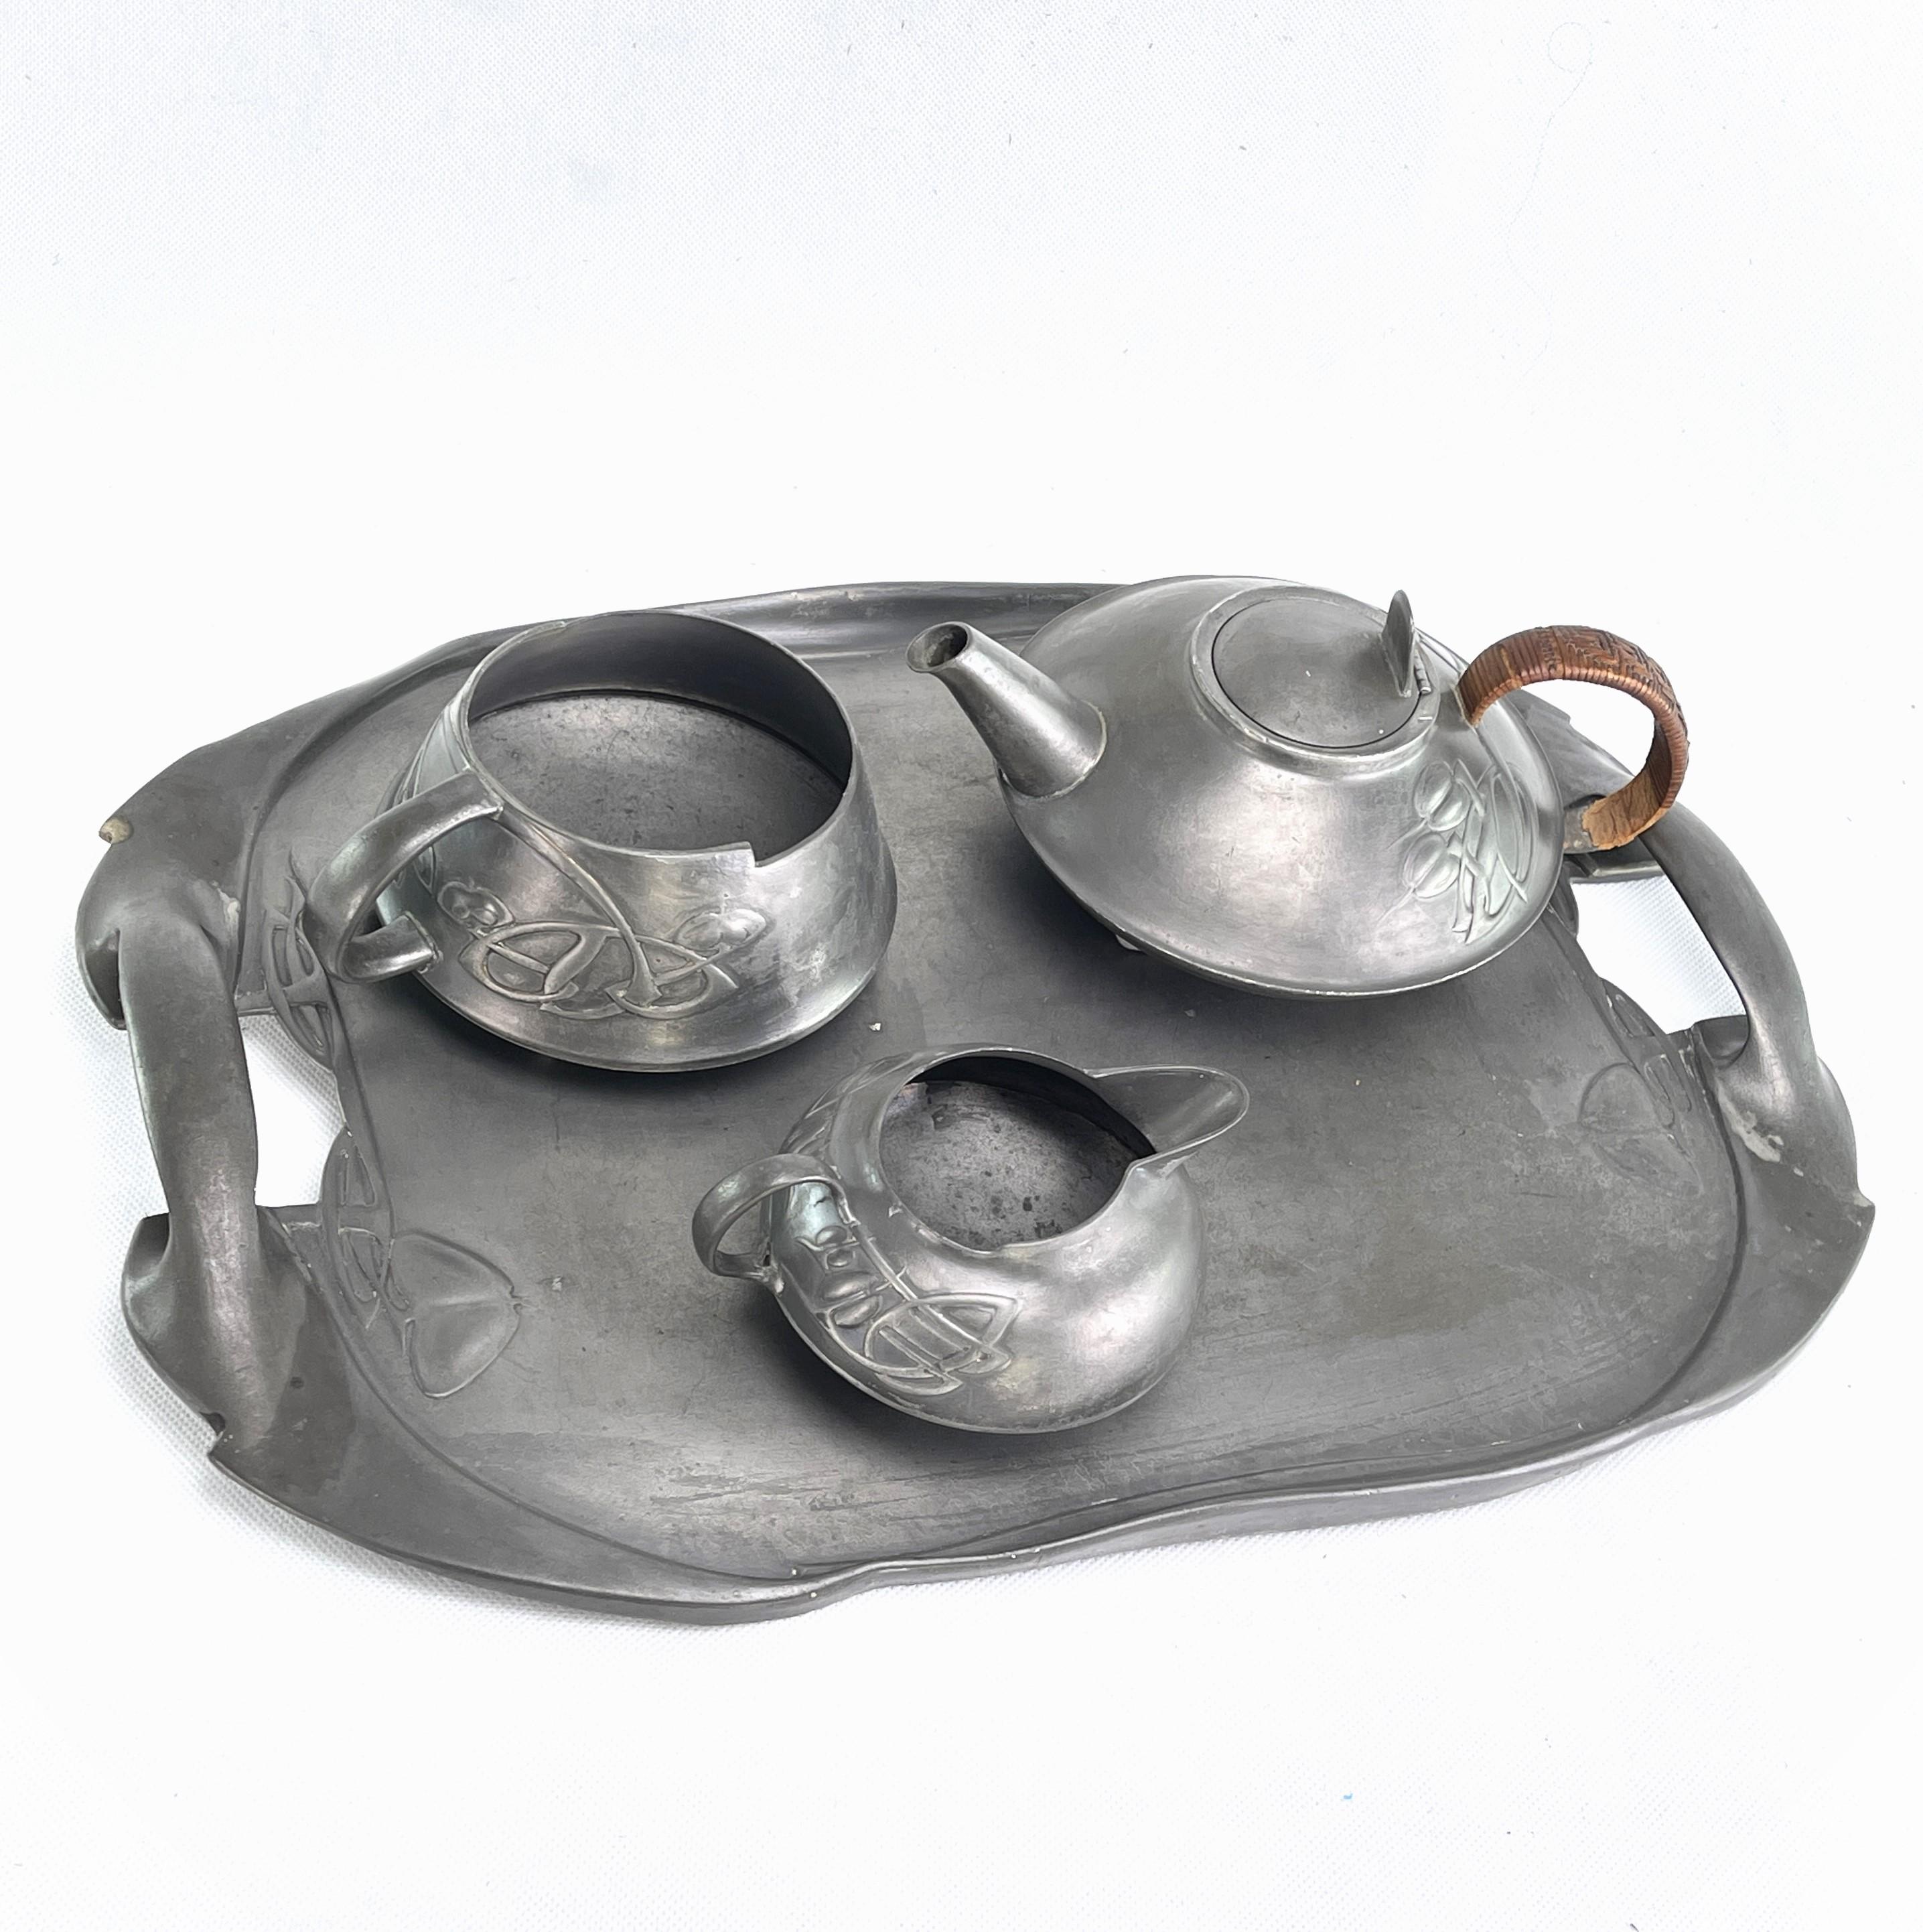 Tea Service by ARCHIBALD KNOX Liberty & Co. Tudric pewter, 1905

Four piece Arts & Crafts Tudric pewter tea service designed by Archibald Knox for Liberty & Co. Everything is offered in a cleaned, unpolished condition.

Set number 0231, the service